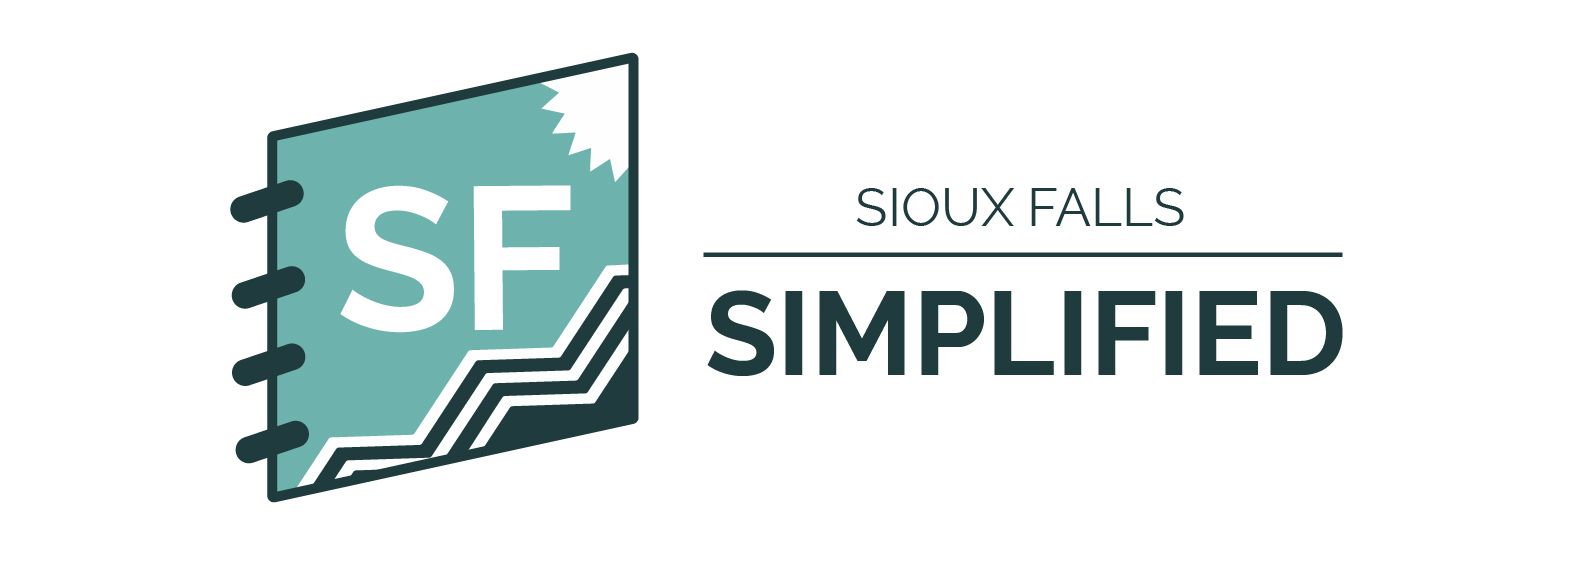 How you can help Sioux Falls Simplified